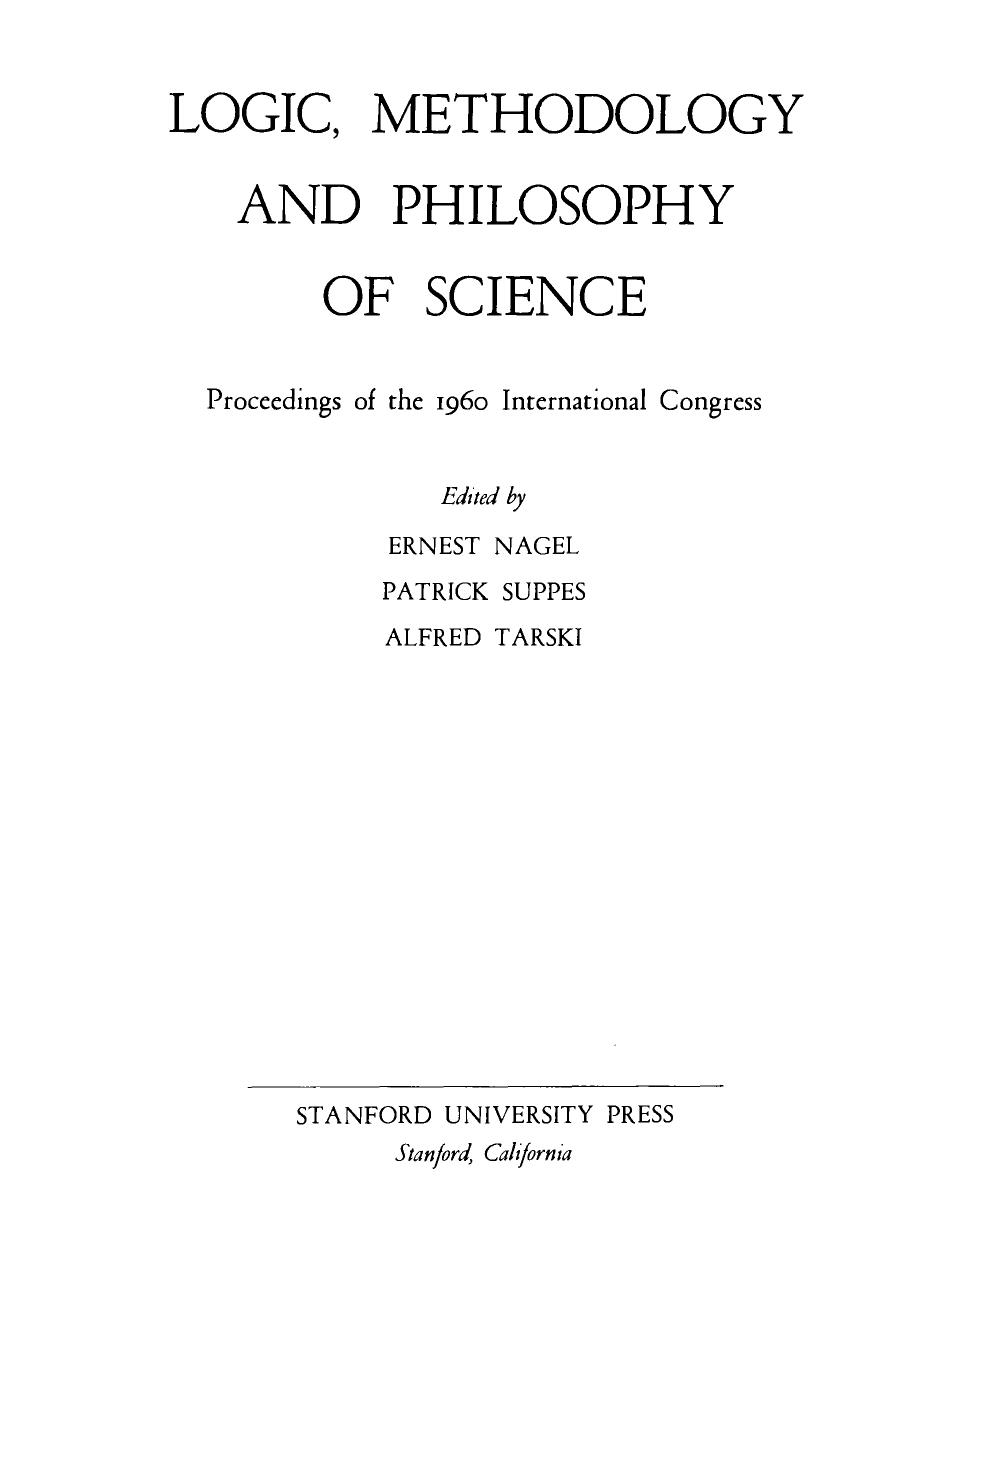 Logic, Methodology and Philosophy of Science - Proceedings of the 1960 International Congress